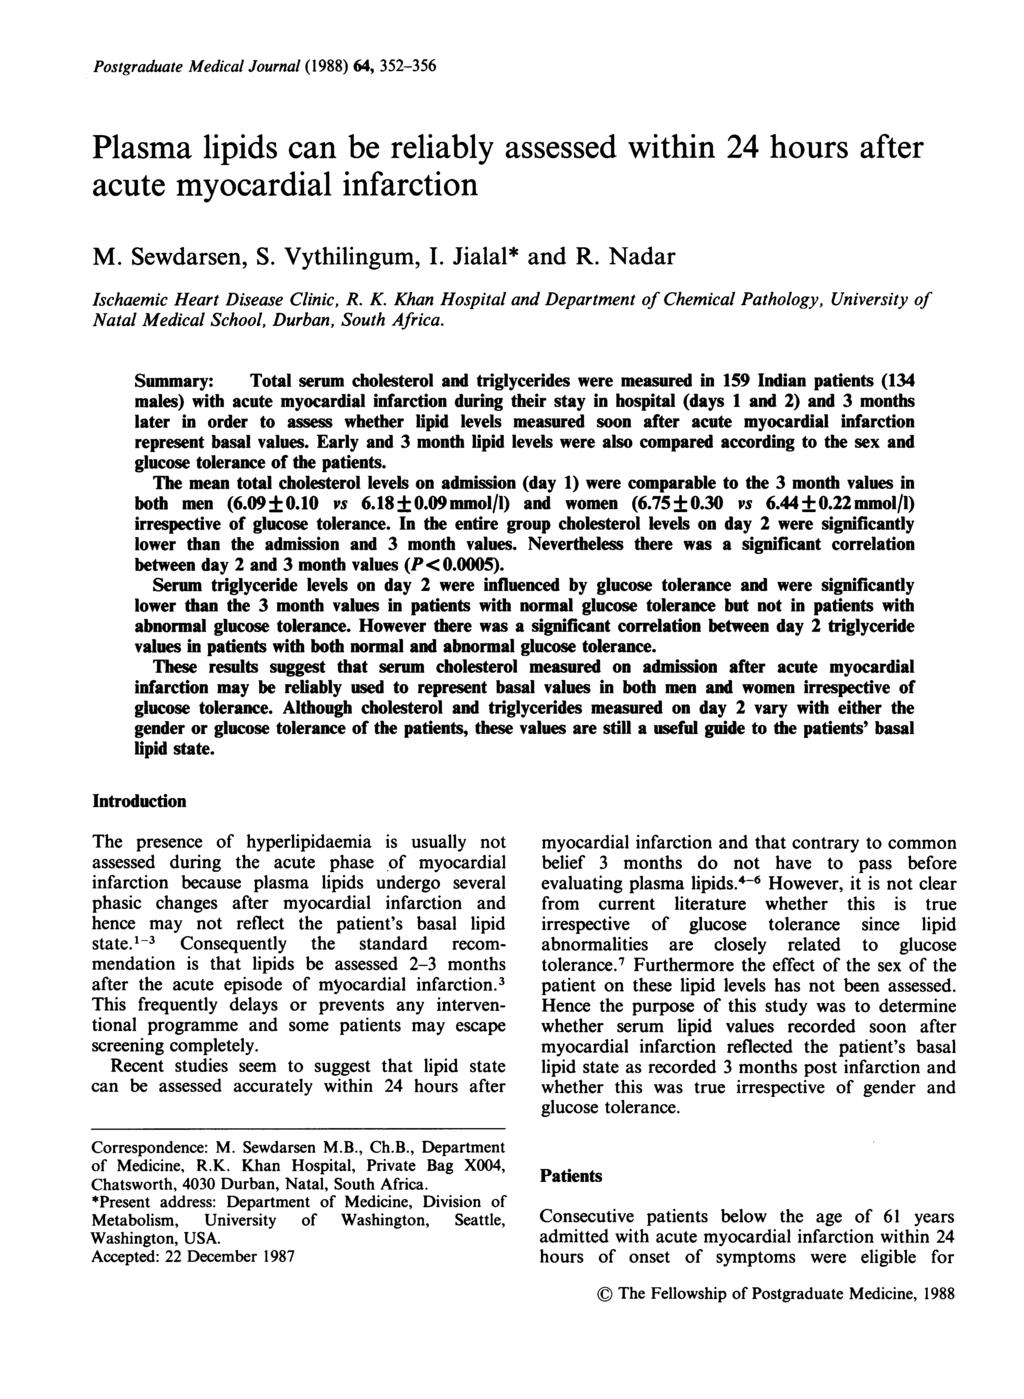 Postgraduate Medical Journal (1988) 64, 352-356 Plasma lipids can be reliably assessed within 24 hours after acute myocardial infarction M. Sewdarsen, S. Vythilingum, I. Jialal* and R.